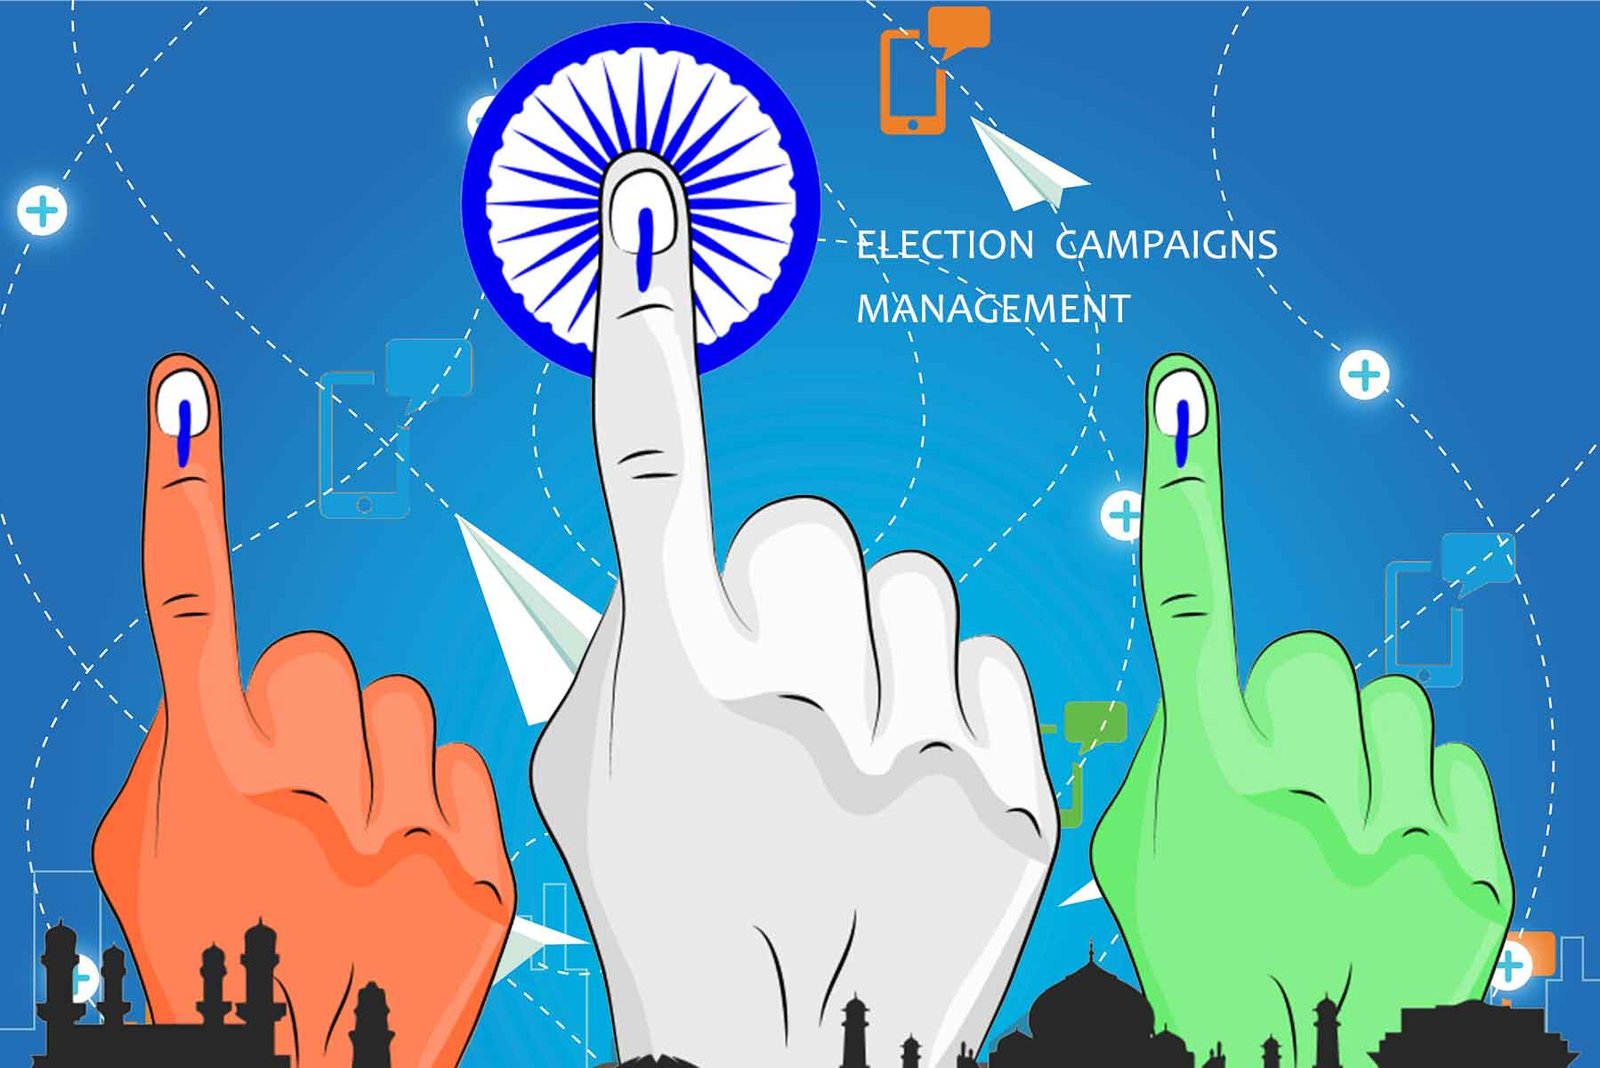 election campaign management company, political digital marketing company in Chennai, best political e-campaign service in india, online election campaign promotion, best THERDAL company in india, political campaign management company, best election marketing company in Chennai, best election marketing company in india